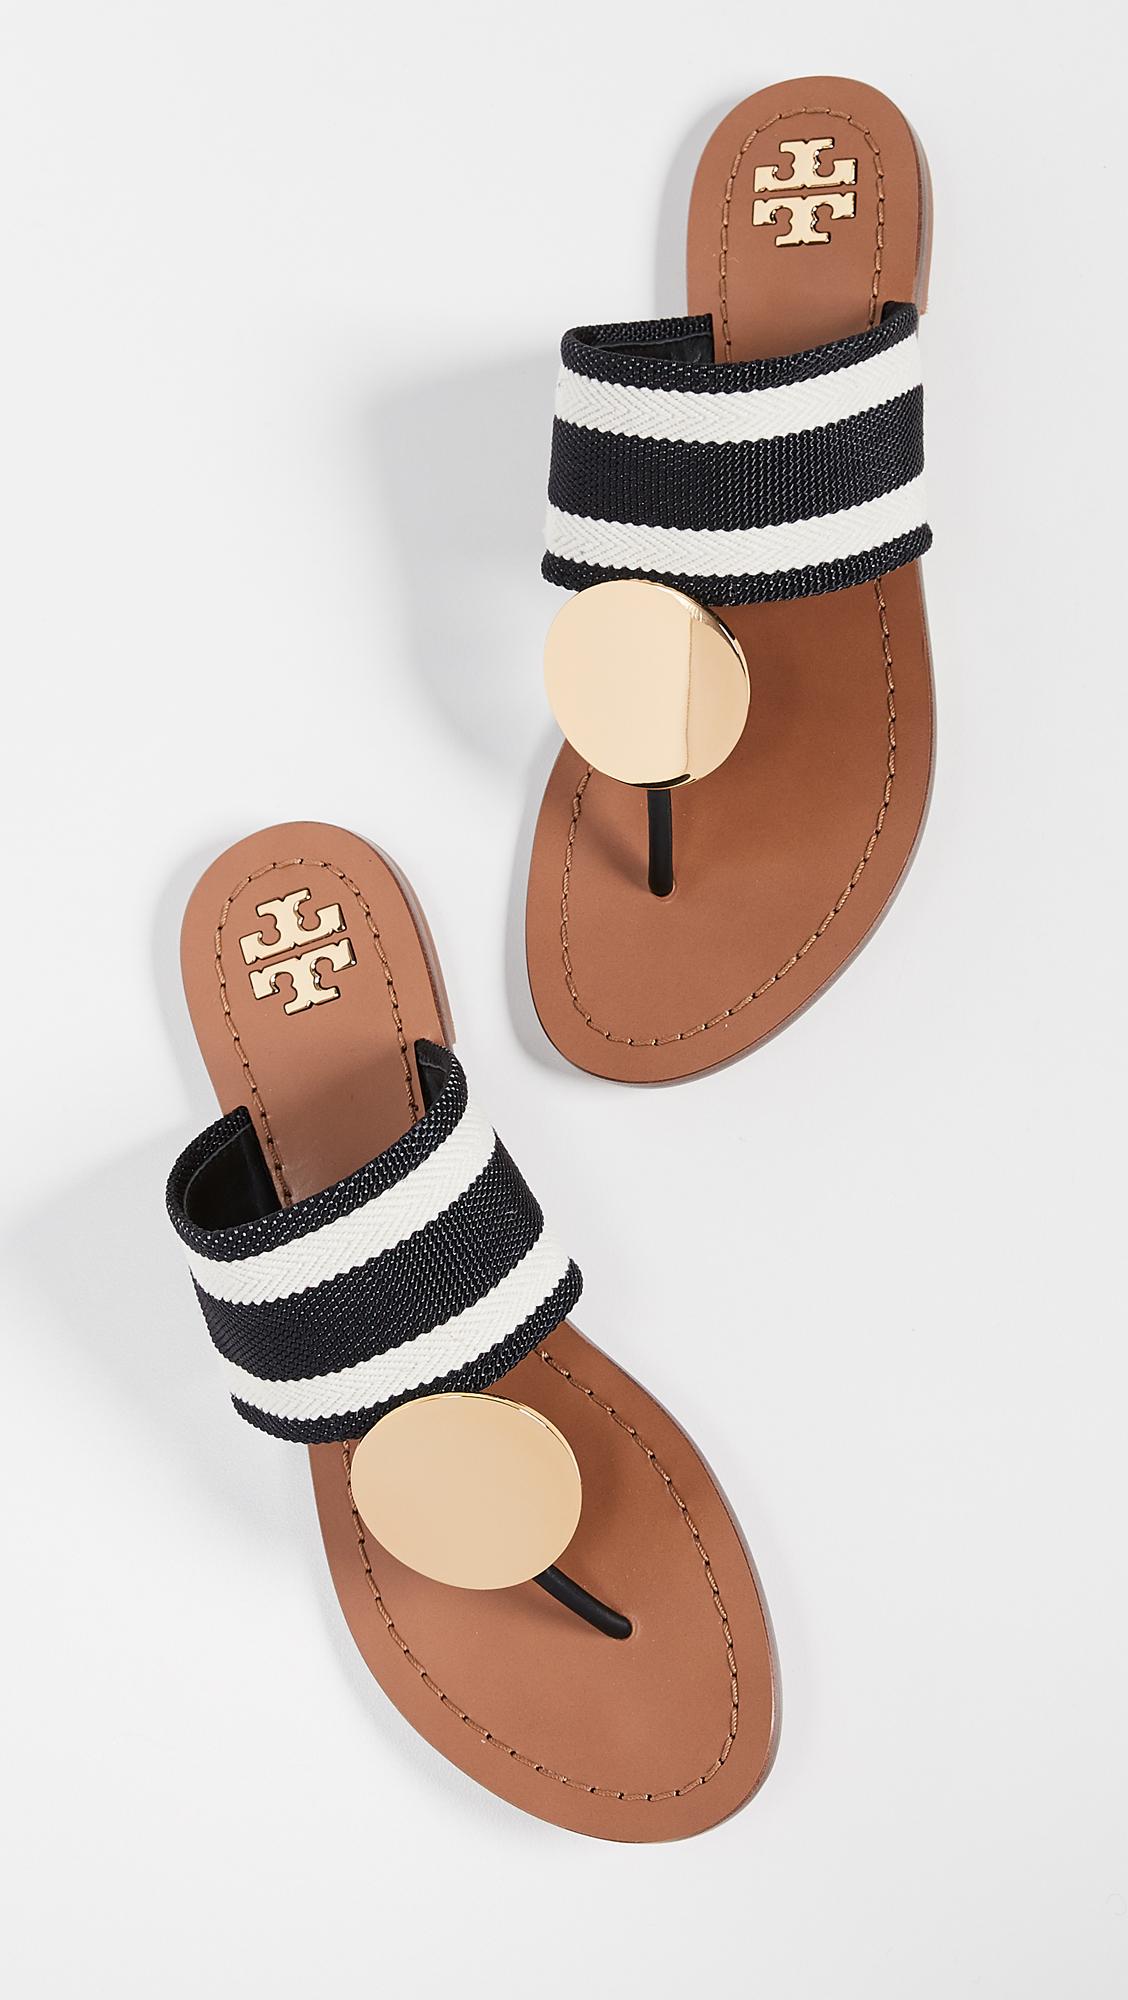 Tory Burch Patos Disk Sandals in Black | Lyst Canada